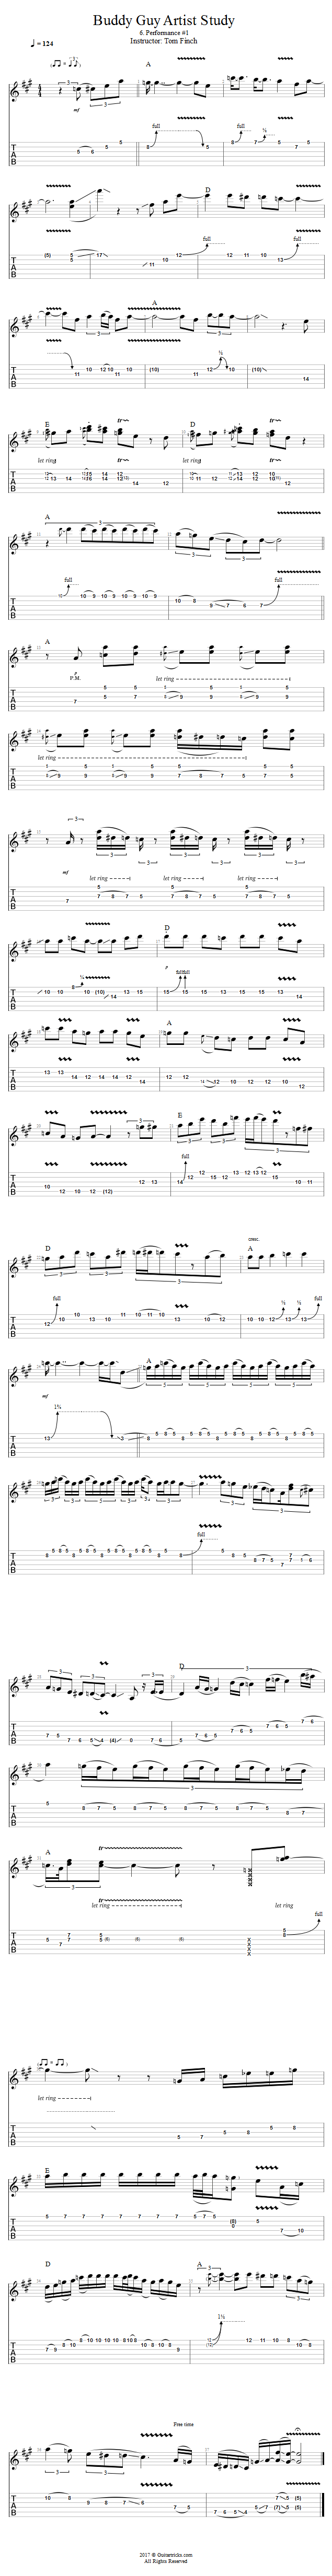 Buddy Guy Artist Study: Performance #1 song notation